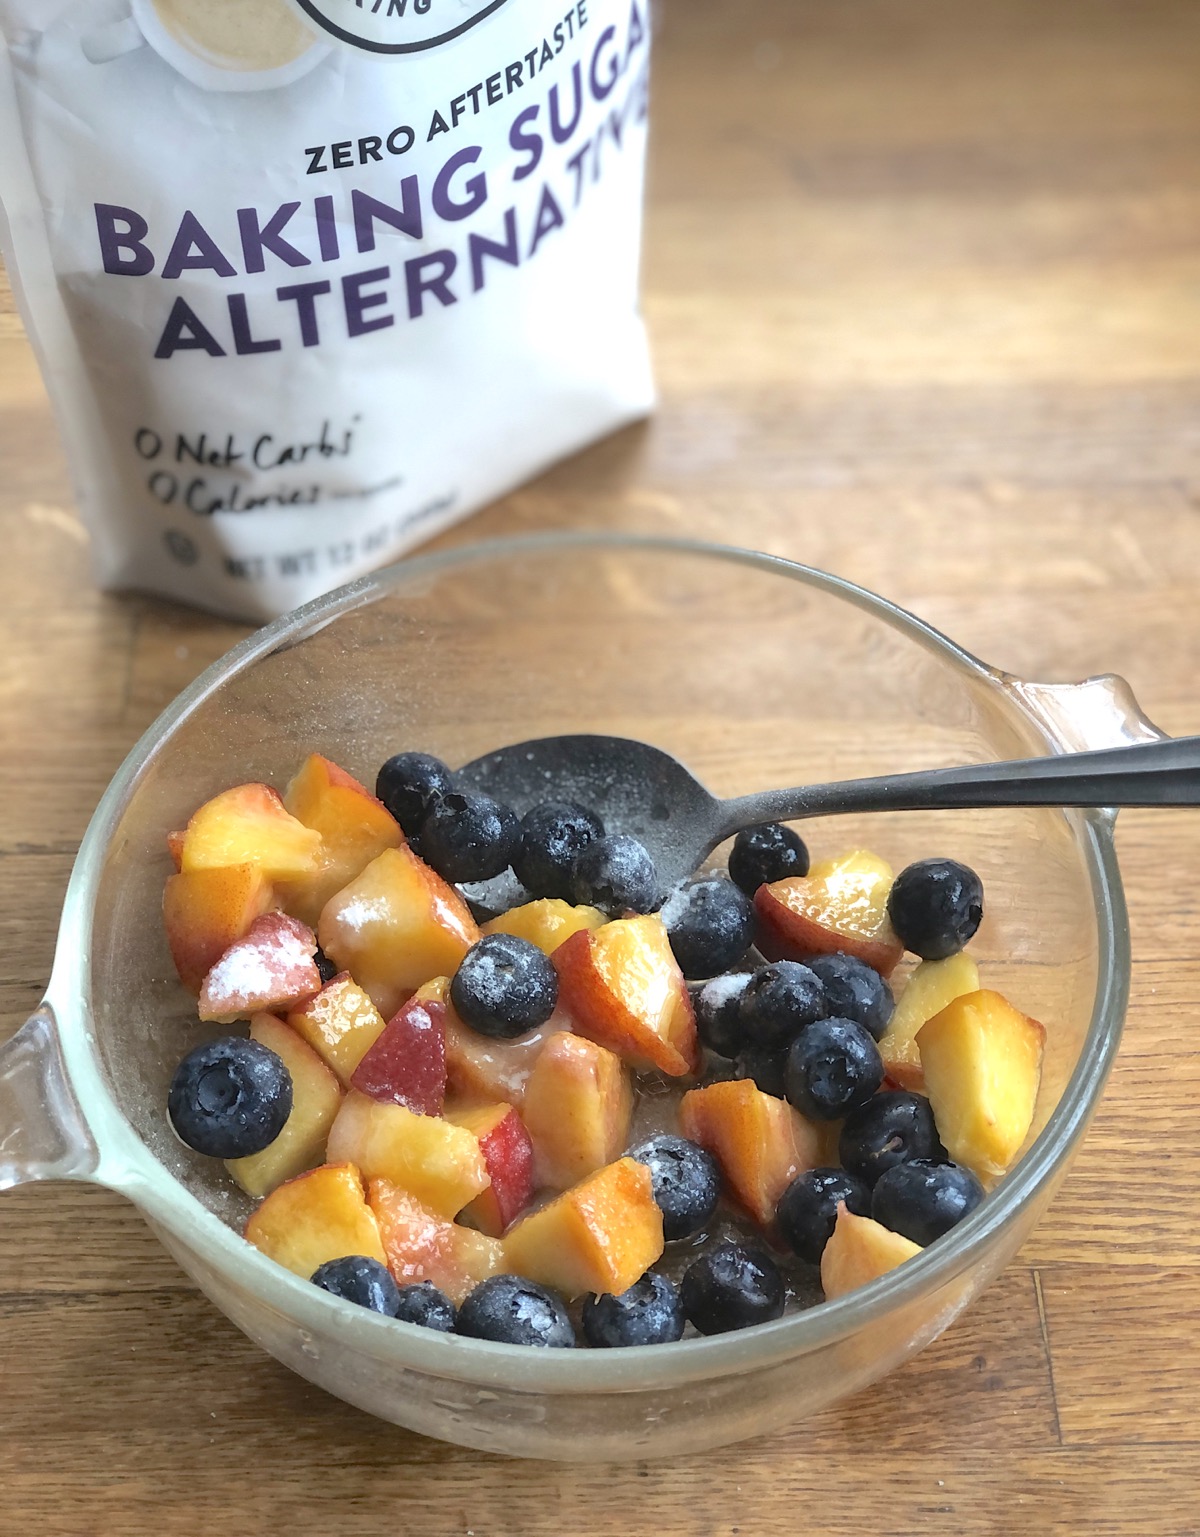 Fresh blueberries and diced peaches in a bowl with Baking Sugar Alternative sprinkled on top, to sweeten.